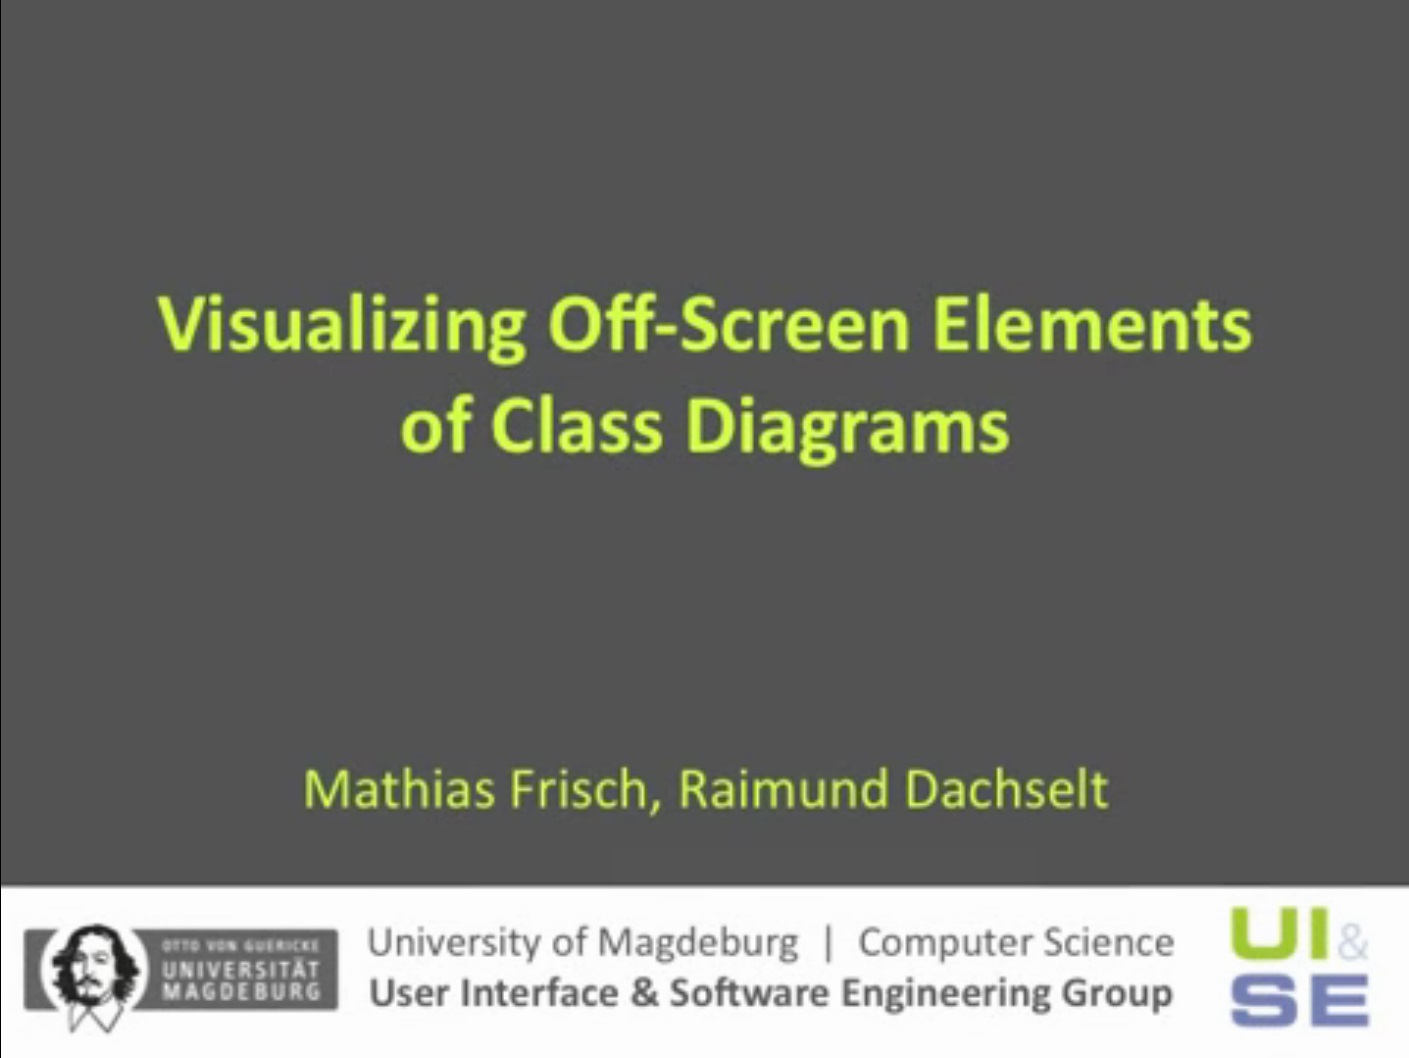 Full video of Visualizing Off-Screen Elements of Class Diagrams.